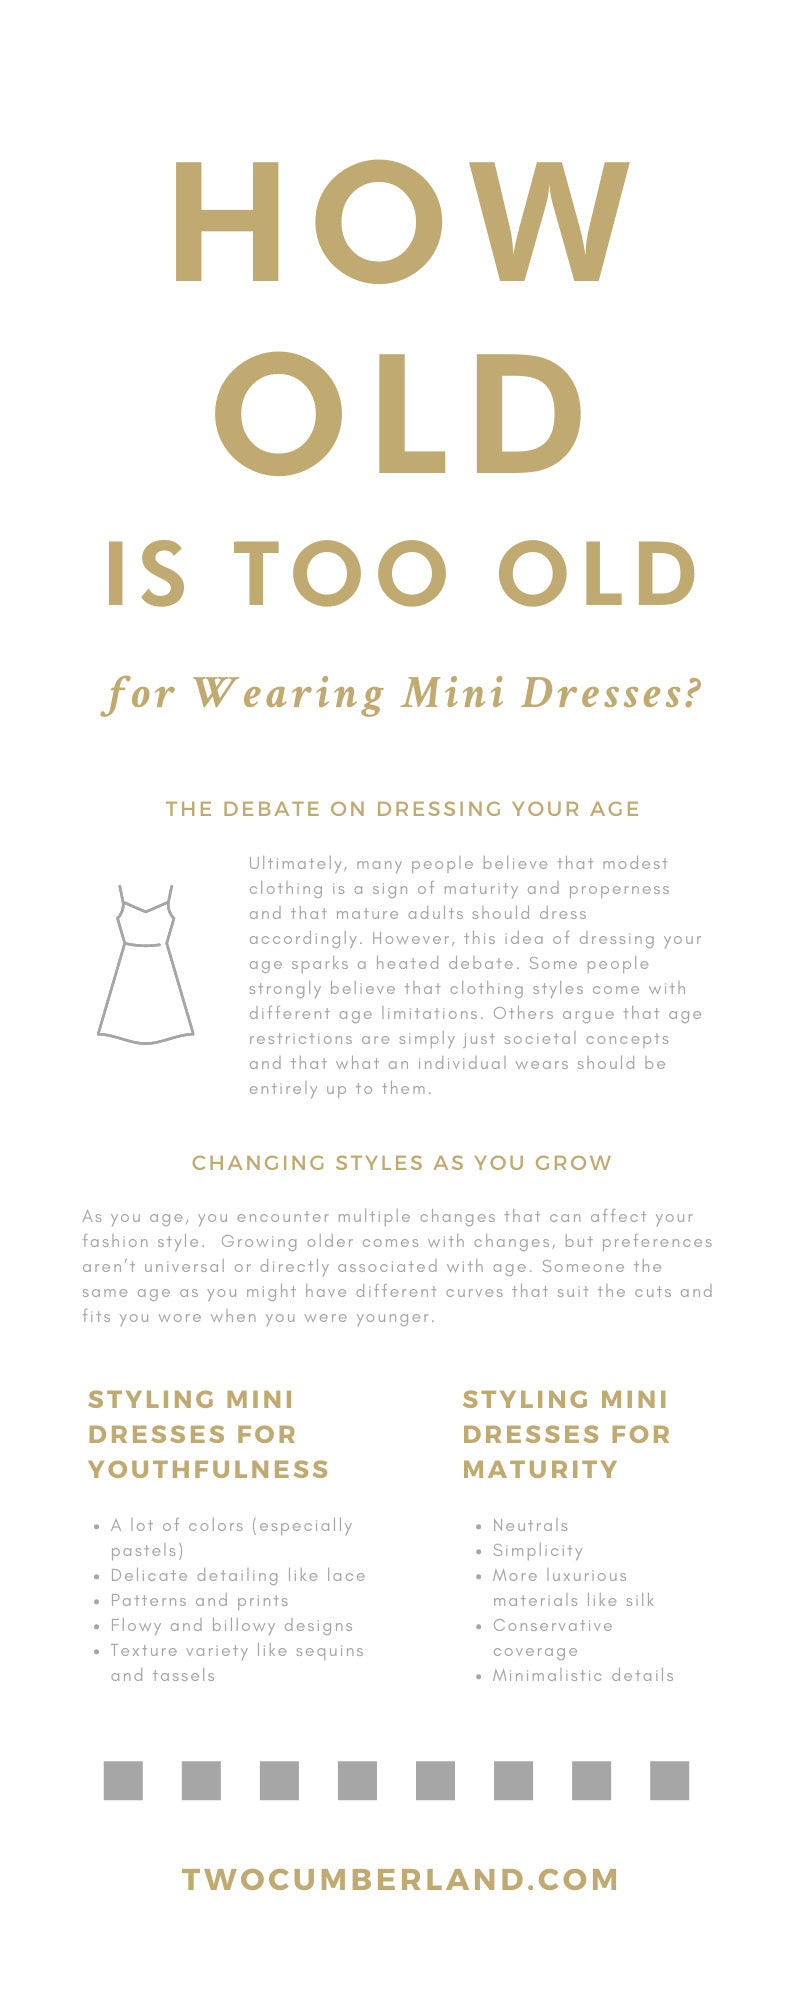 How Old Is Too Old for Wearing Mini Dresses?